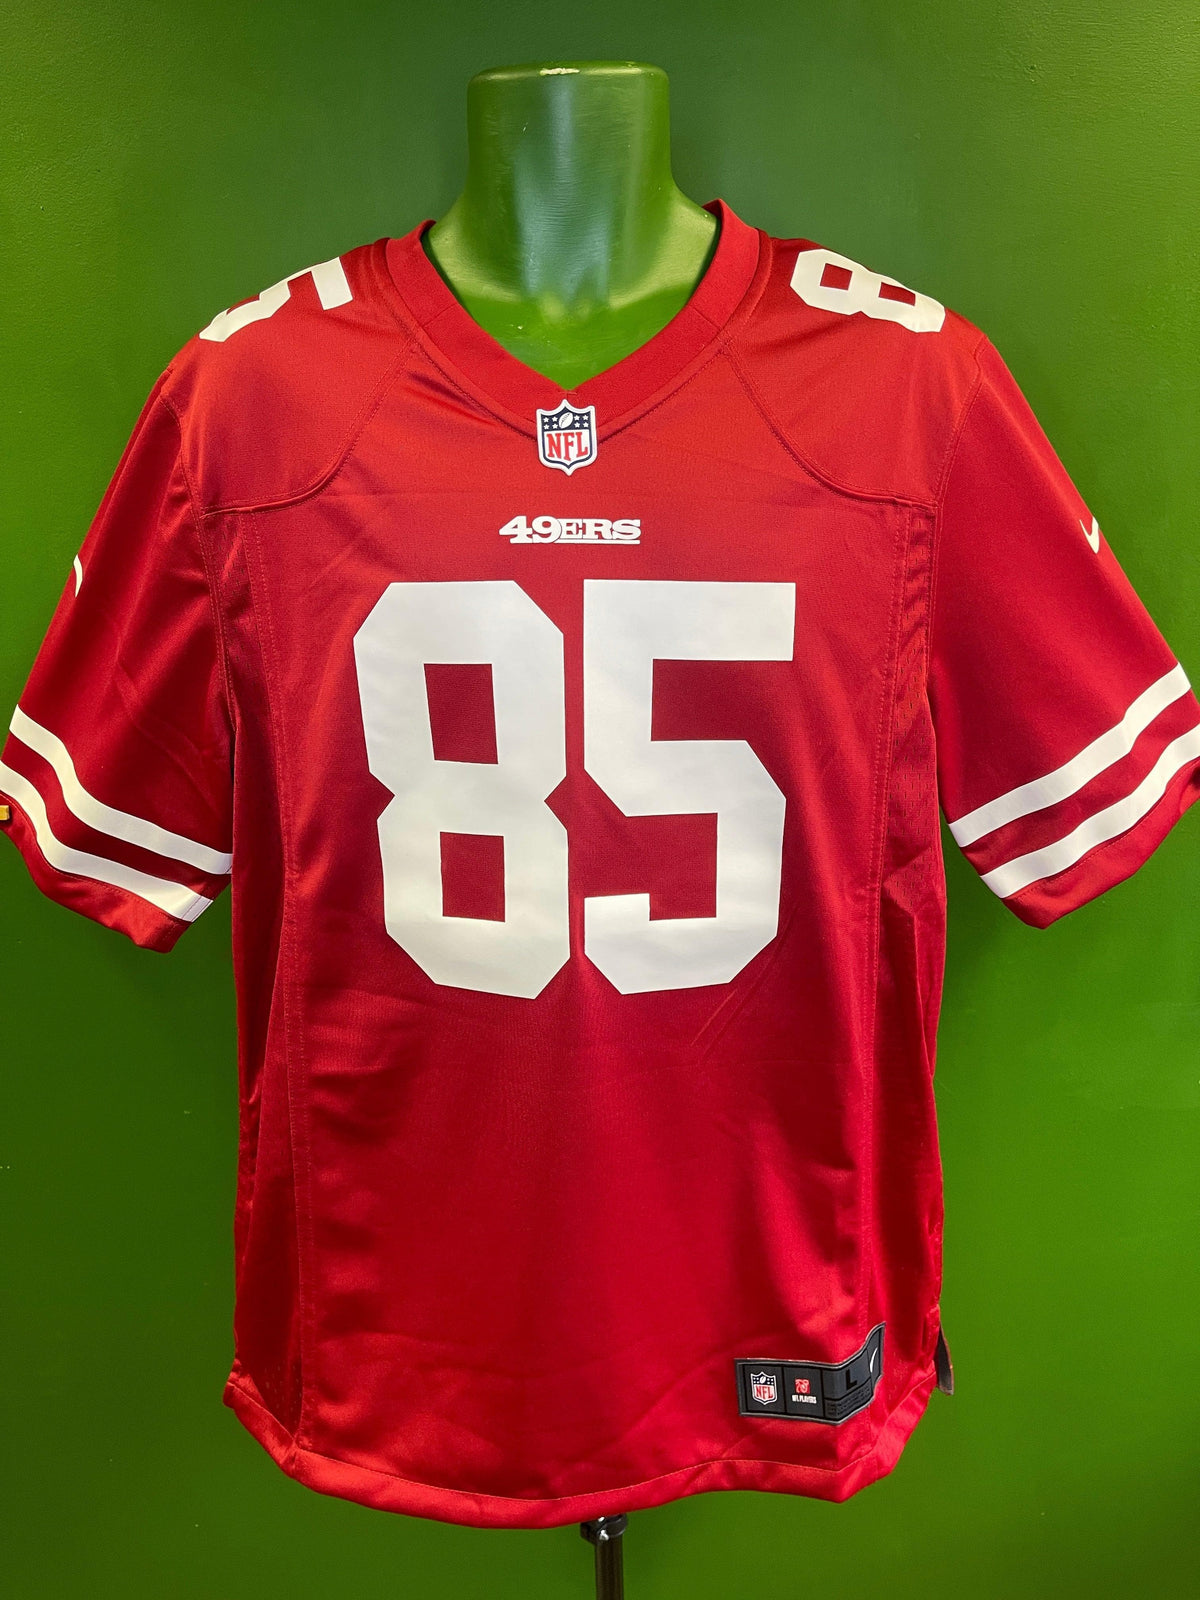 NFL 49ers #97 Jersey & 49ers cap - general for sale - by owner